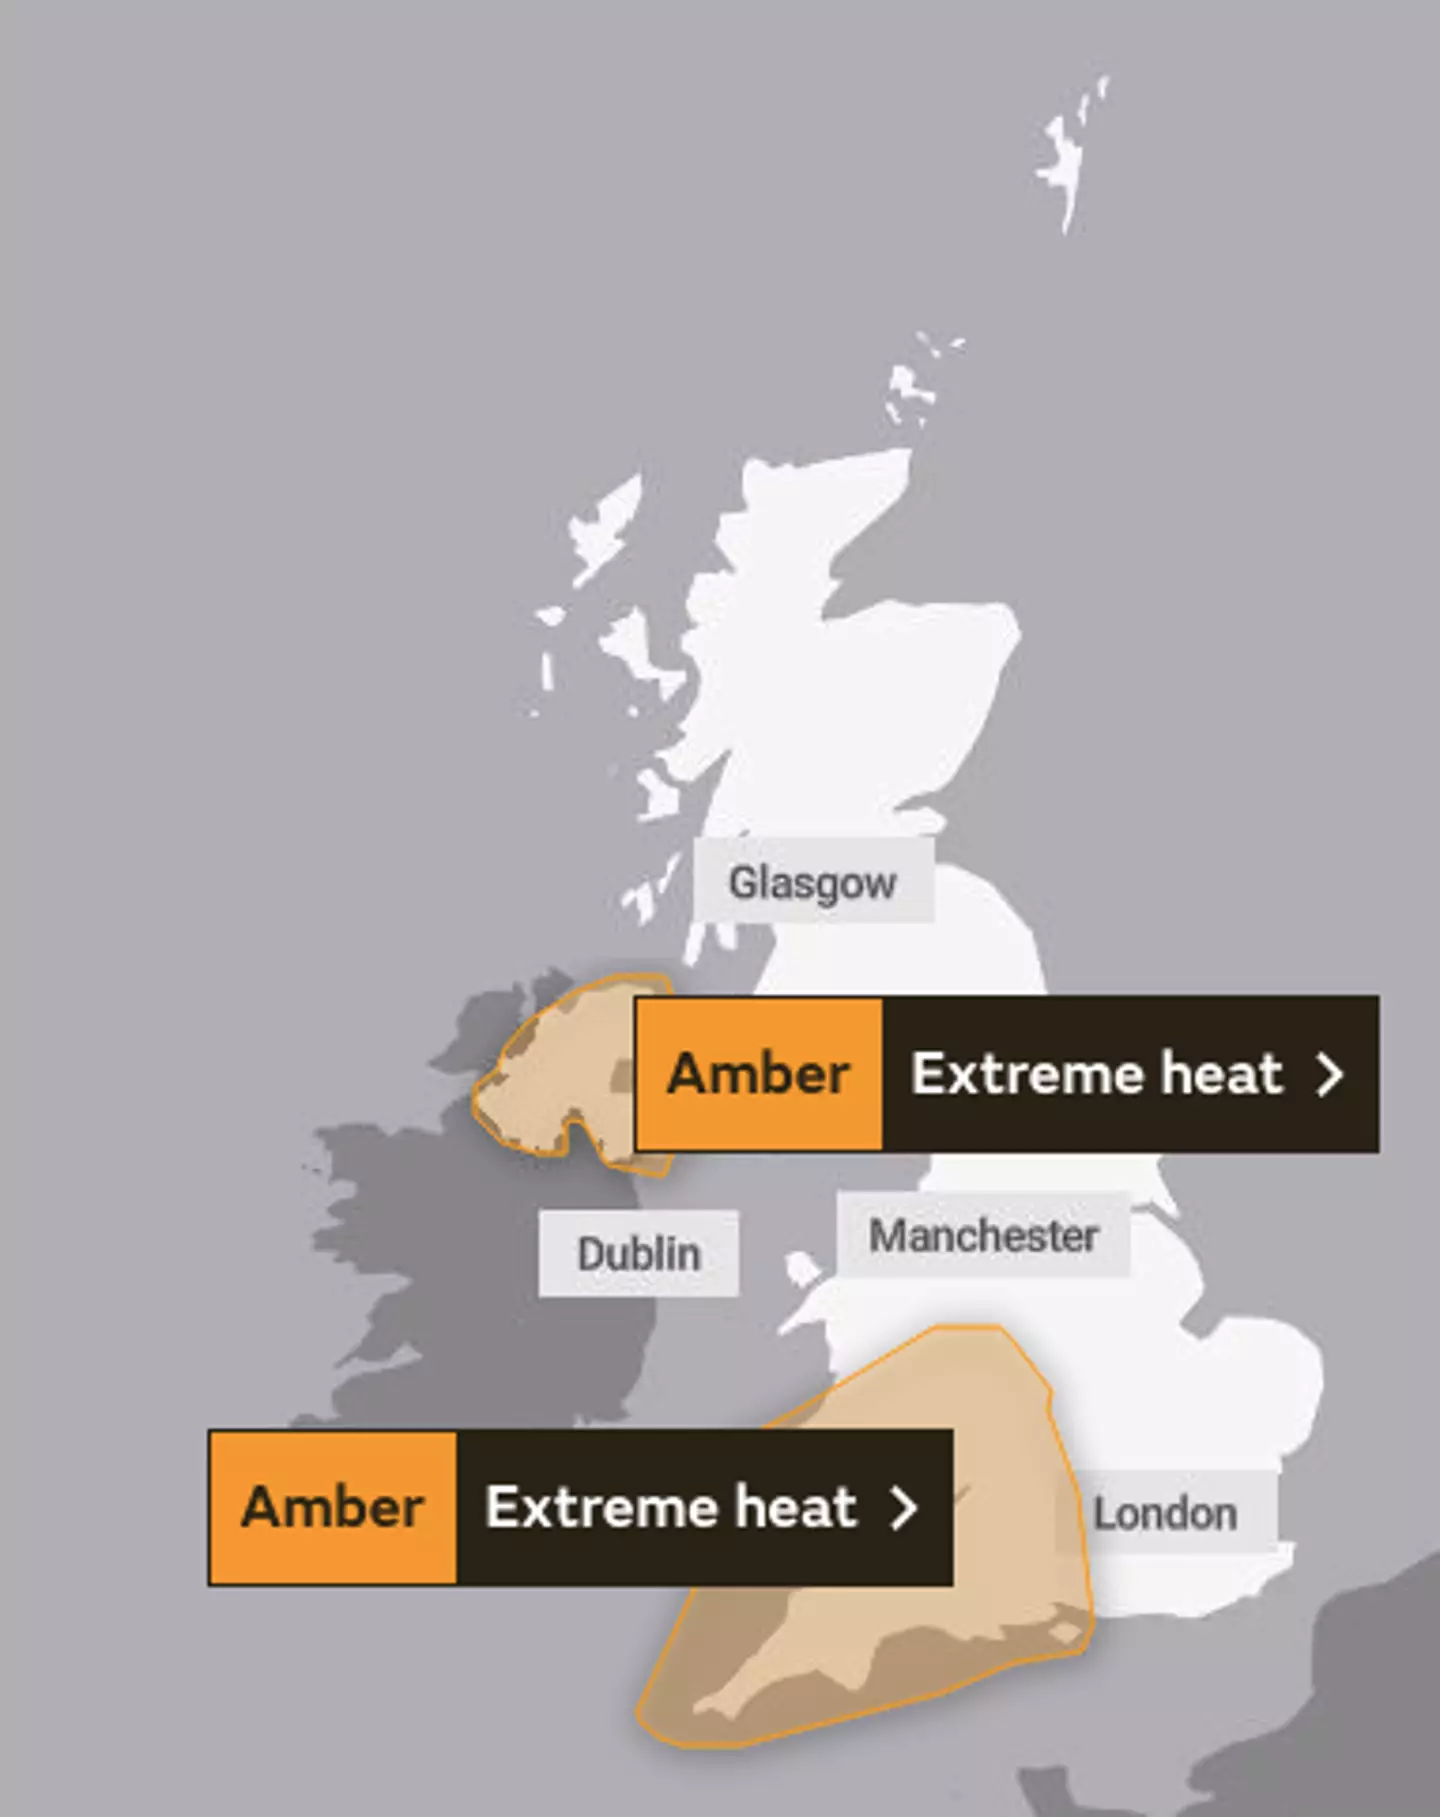 The MET Office has currently issued hot weather warnings (